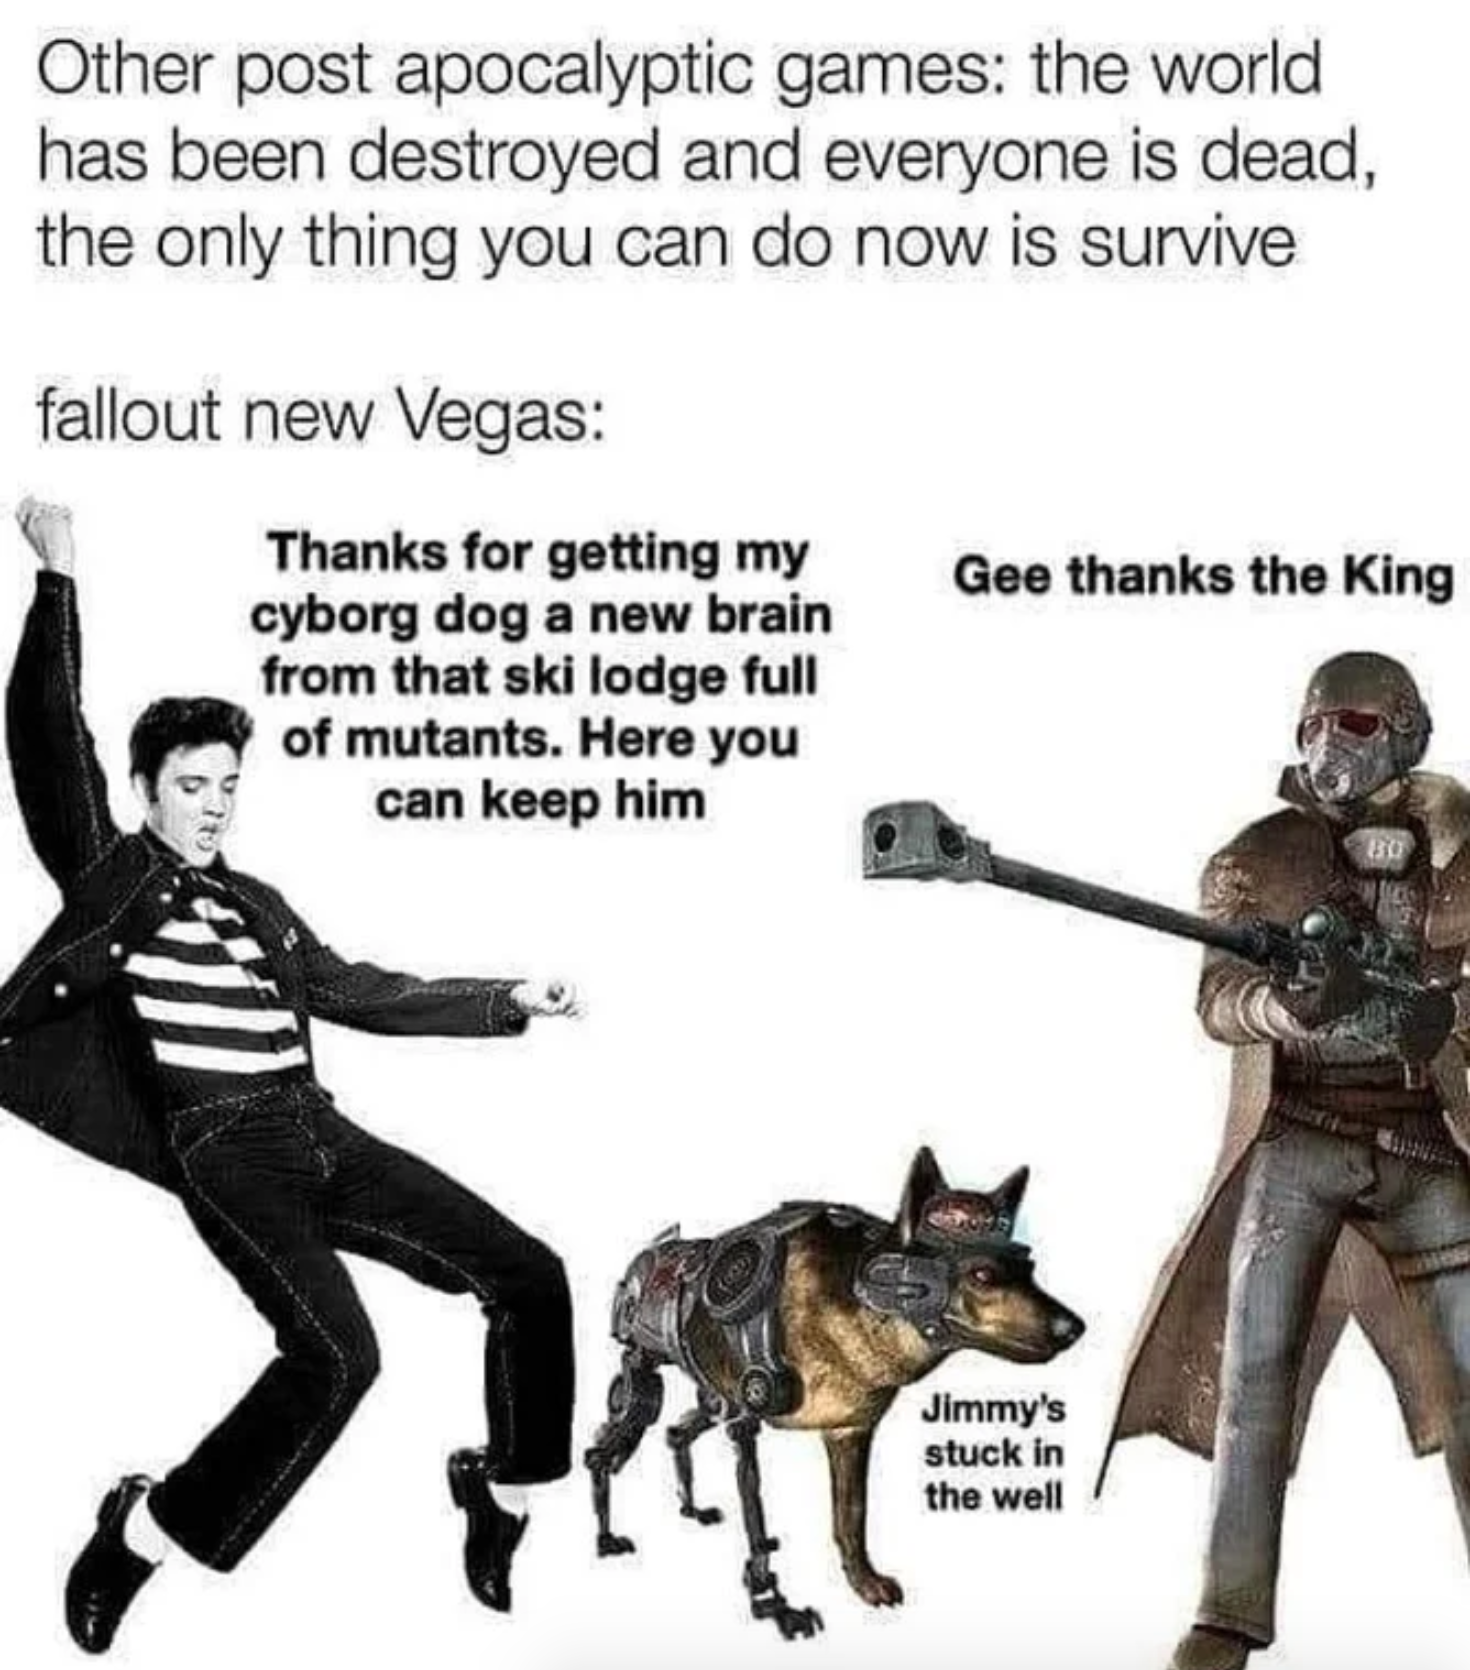 funny gaming memes  - elvis presley jailhouse rock - Other post apocalyptic games the world has been destroyed and everyone is dead, the only thing you can do now is survive fallout new Vegas Gee thanks the King Thanks for getting my cyborg dog a new br